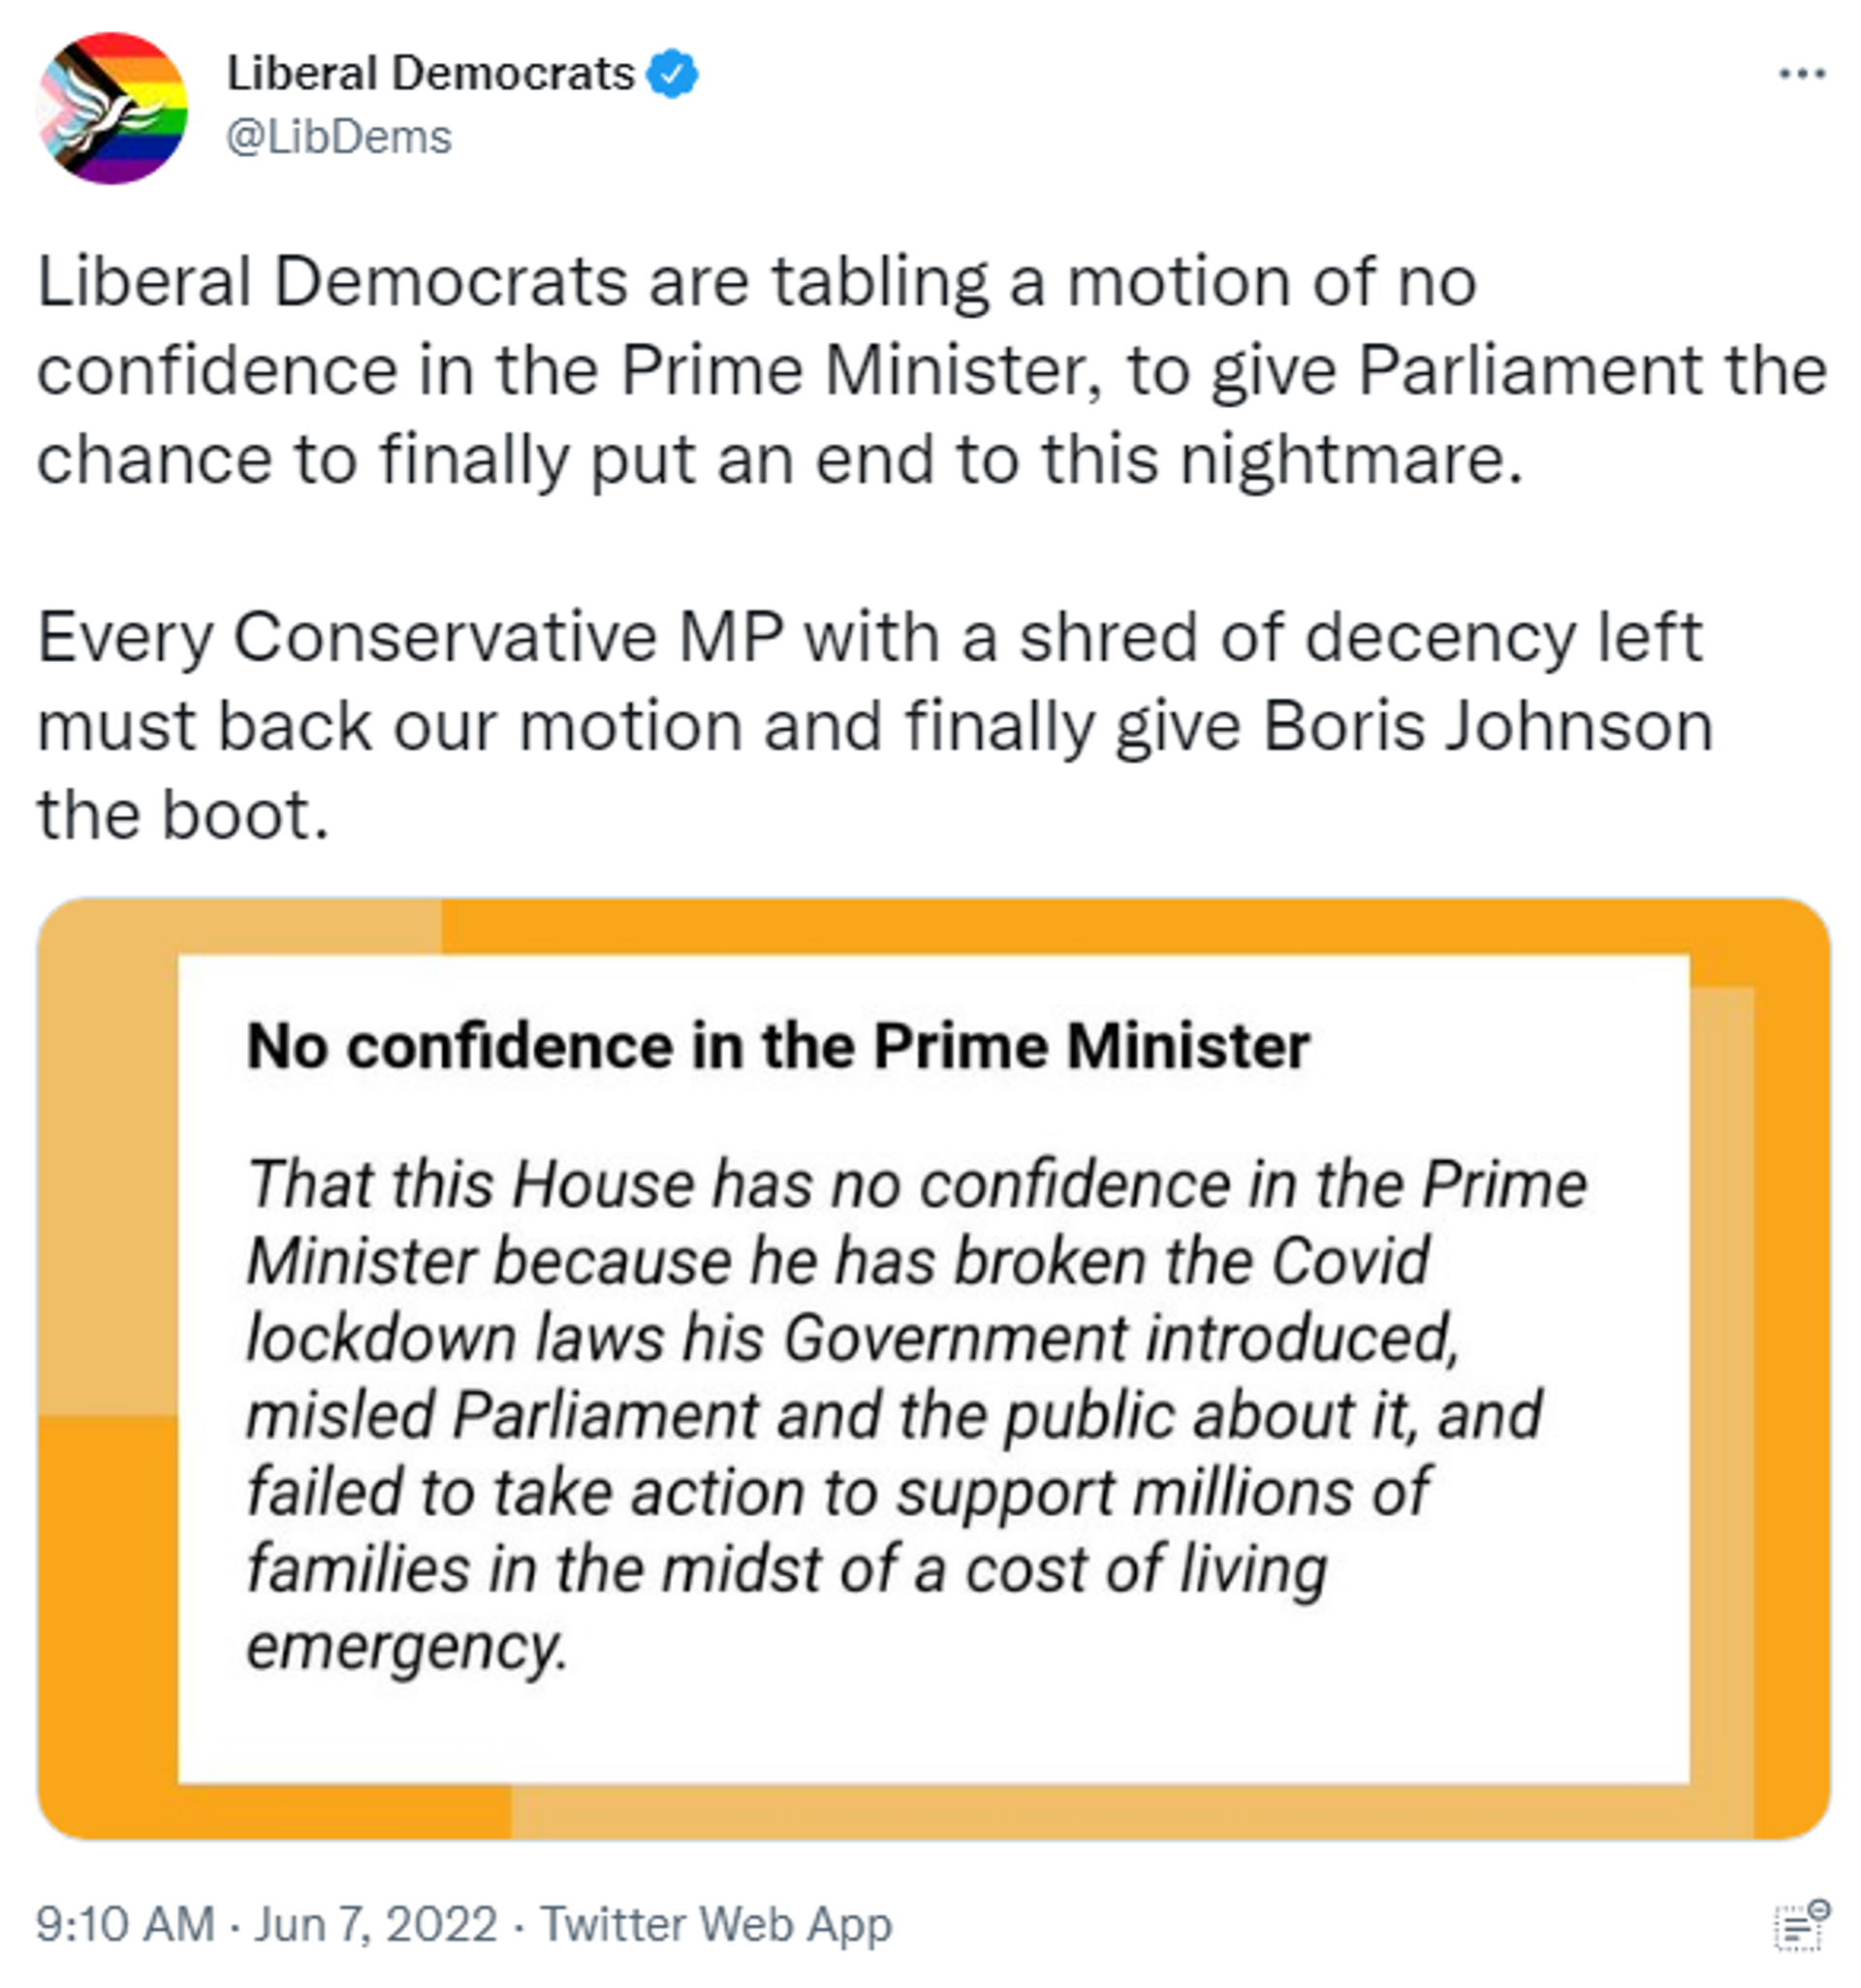 Tweet by the British Liberal Democratic Party announcing a no-confidence motion in Prime Minister Boris Johnson - Sputnik International, 1920, 07.06.2022